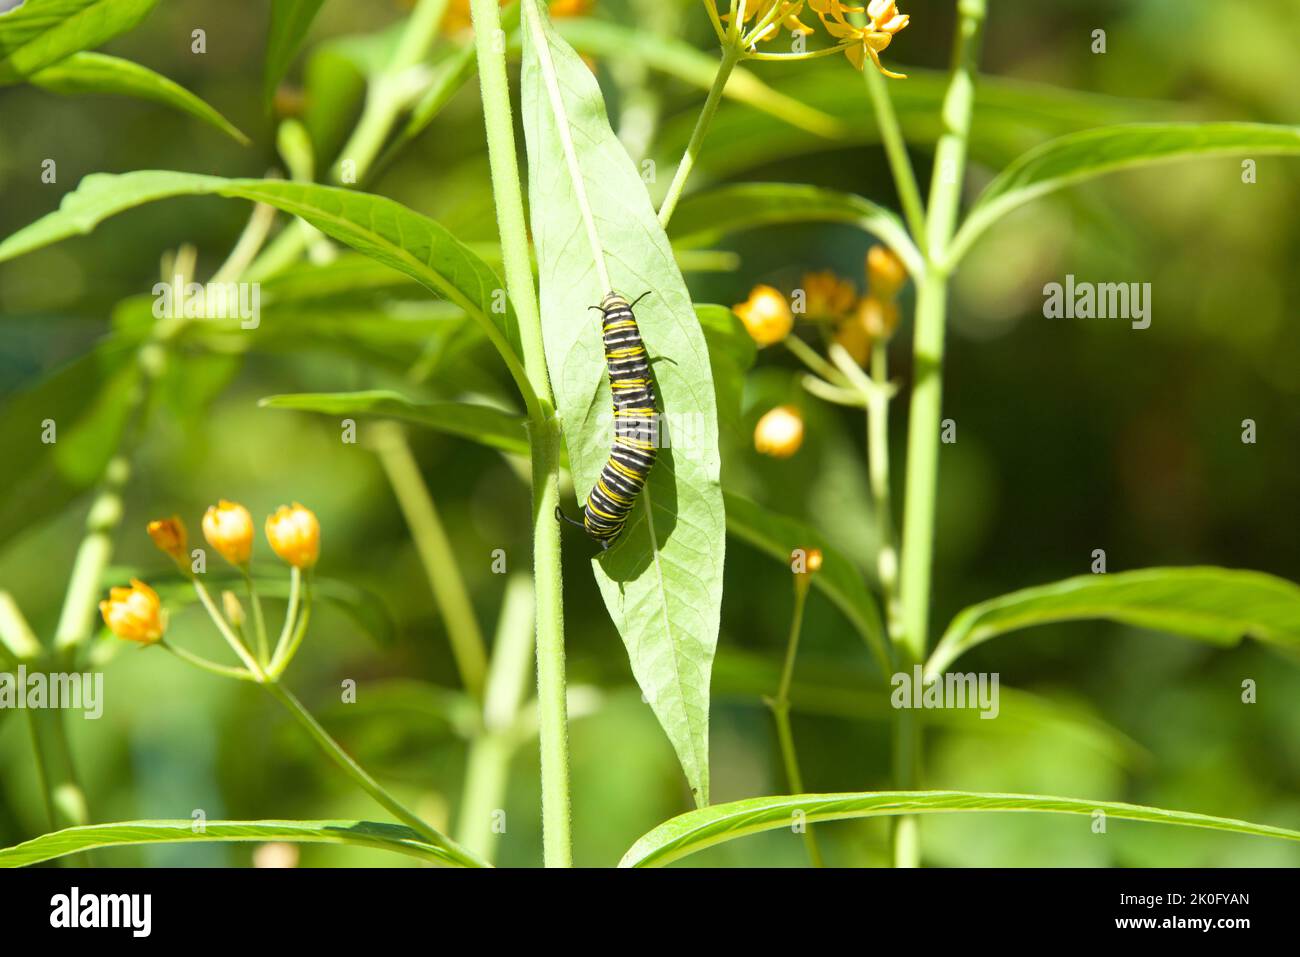 Second instar monarch butterfly caterpillar on green milkweed leaf with many green leaves in background. Stock Photo